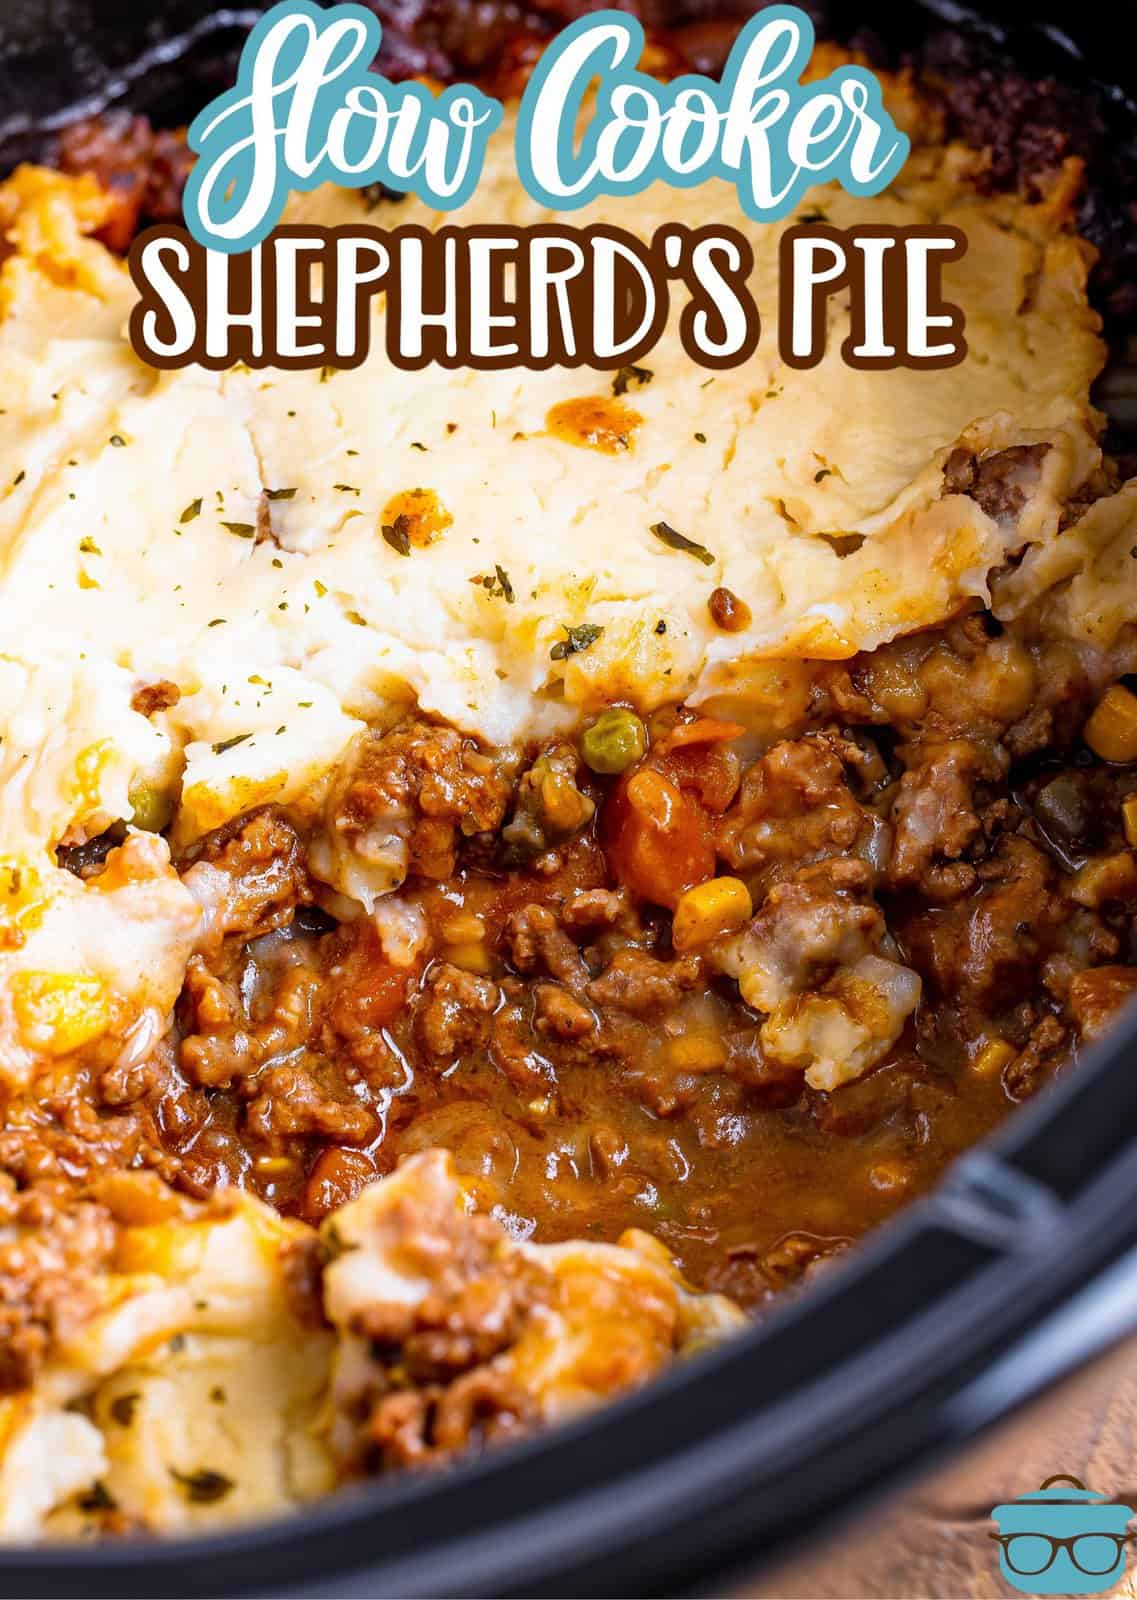 Looking down on a slow cooker with shepherd's pie.